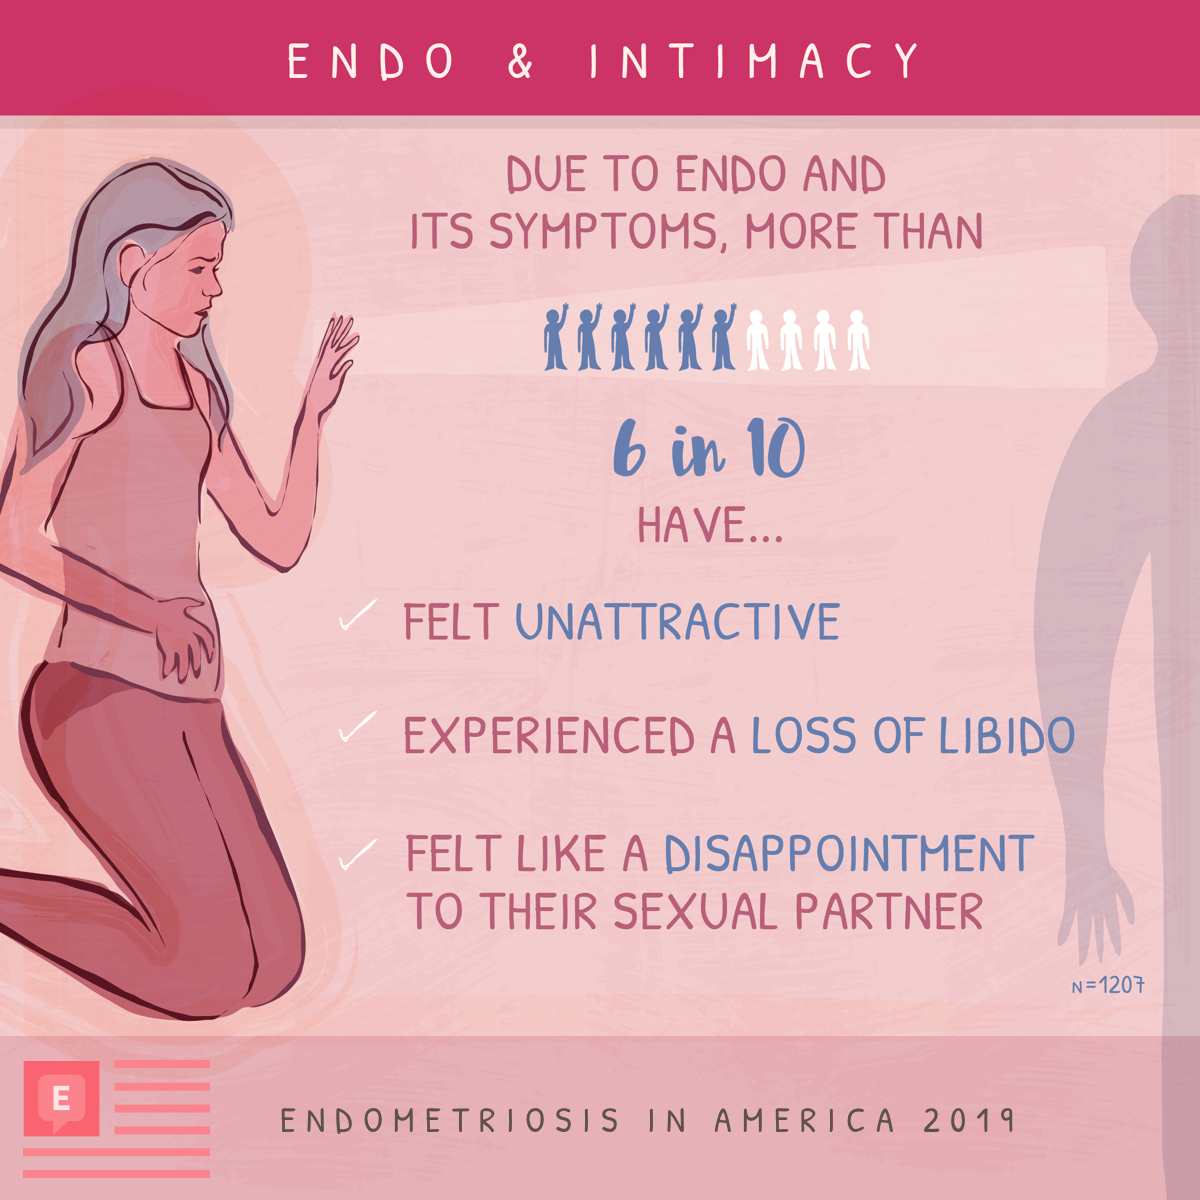 Due to endo, 6 in 10 have felt unattractive, experienced loss of libido, or felt like a disappointment to sexual partner.